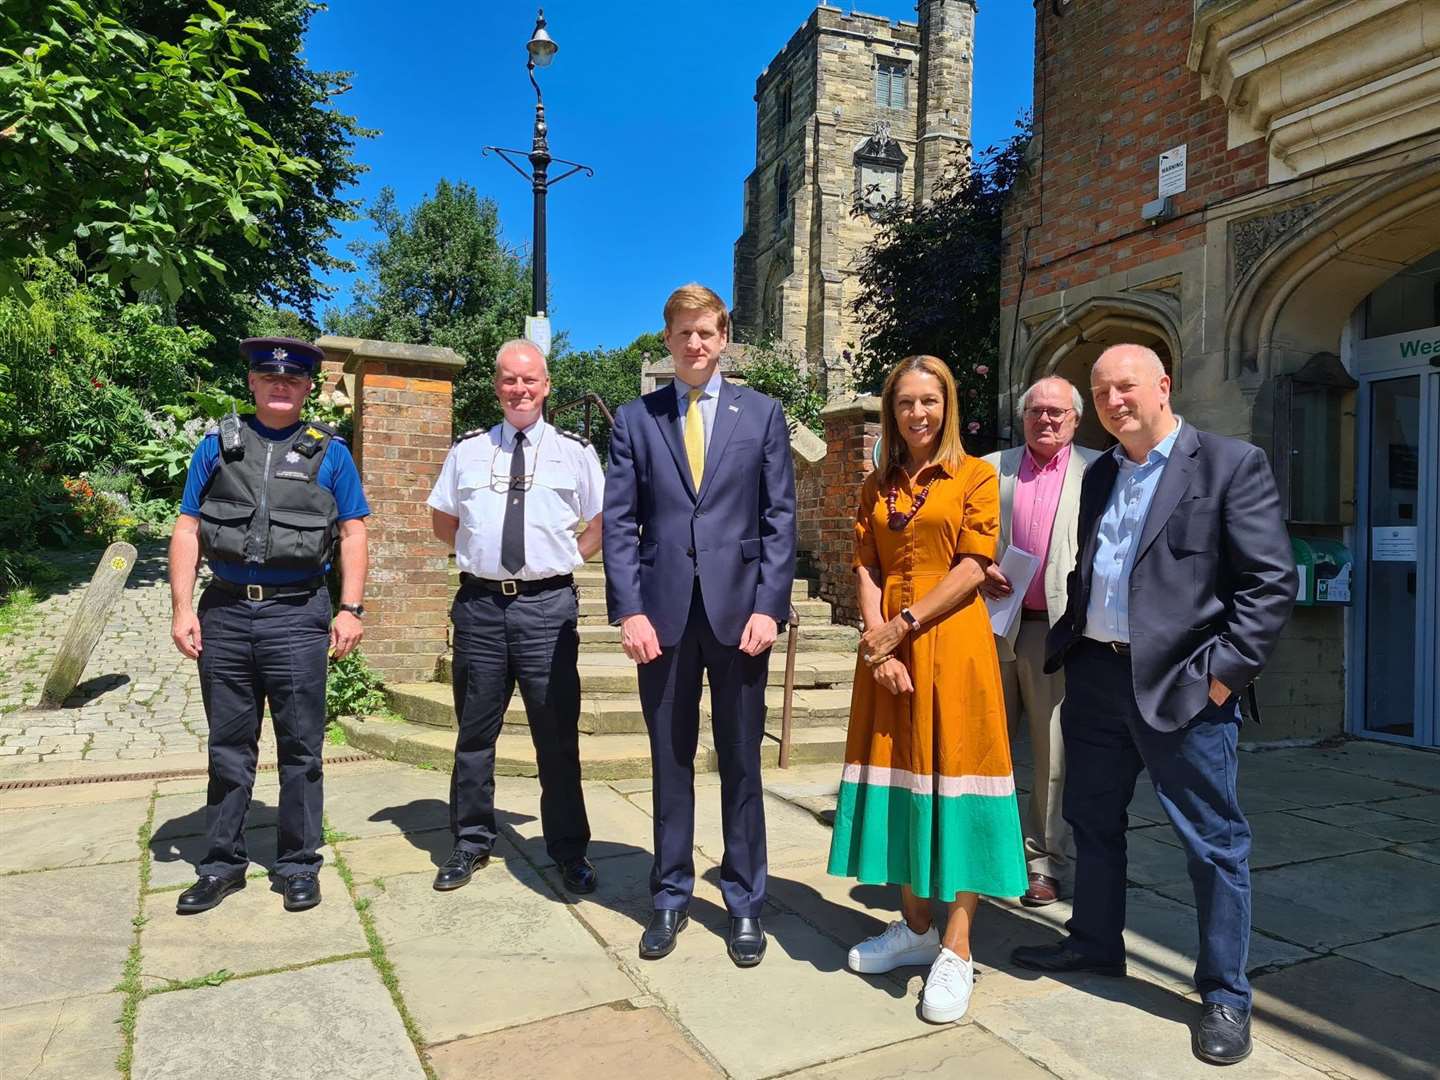 Last year MP Helen Grant met with councillors and the police for a round table meeting on tackling anti-social behaviour